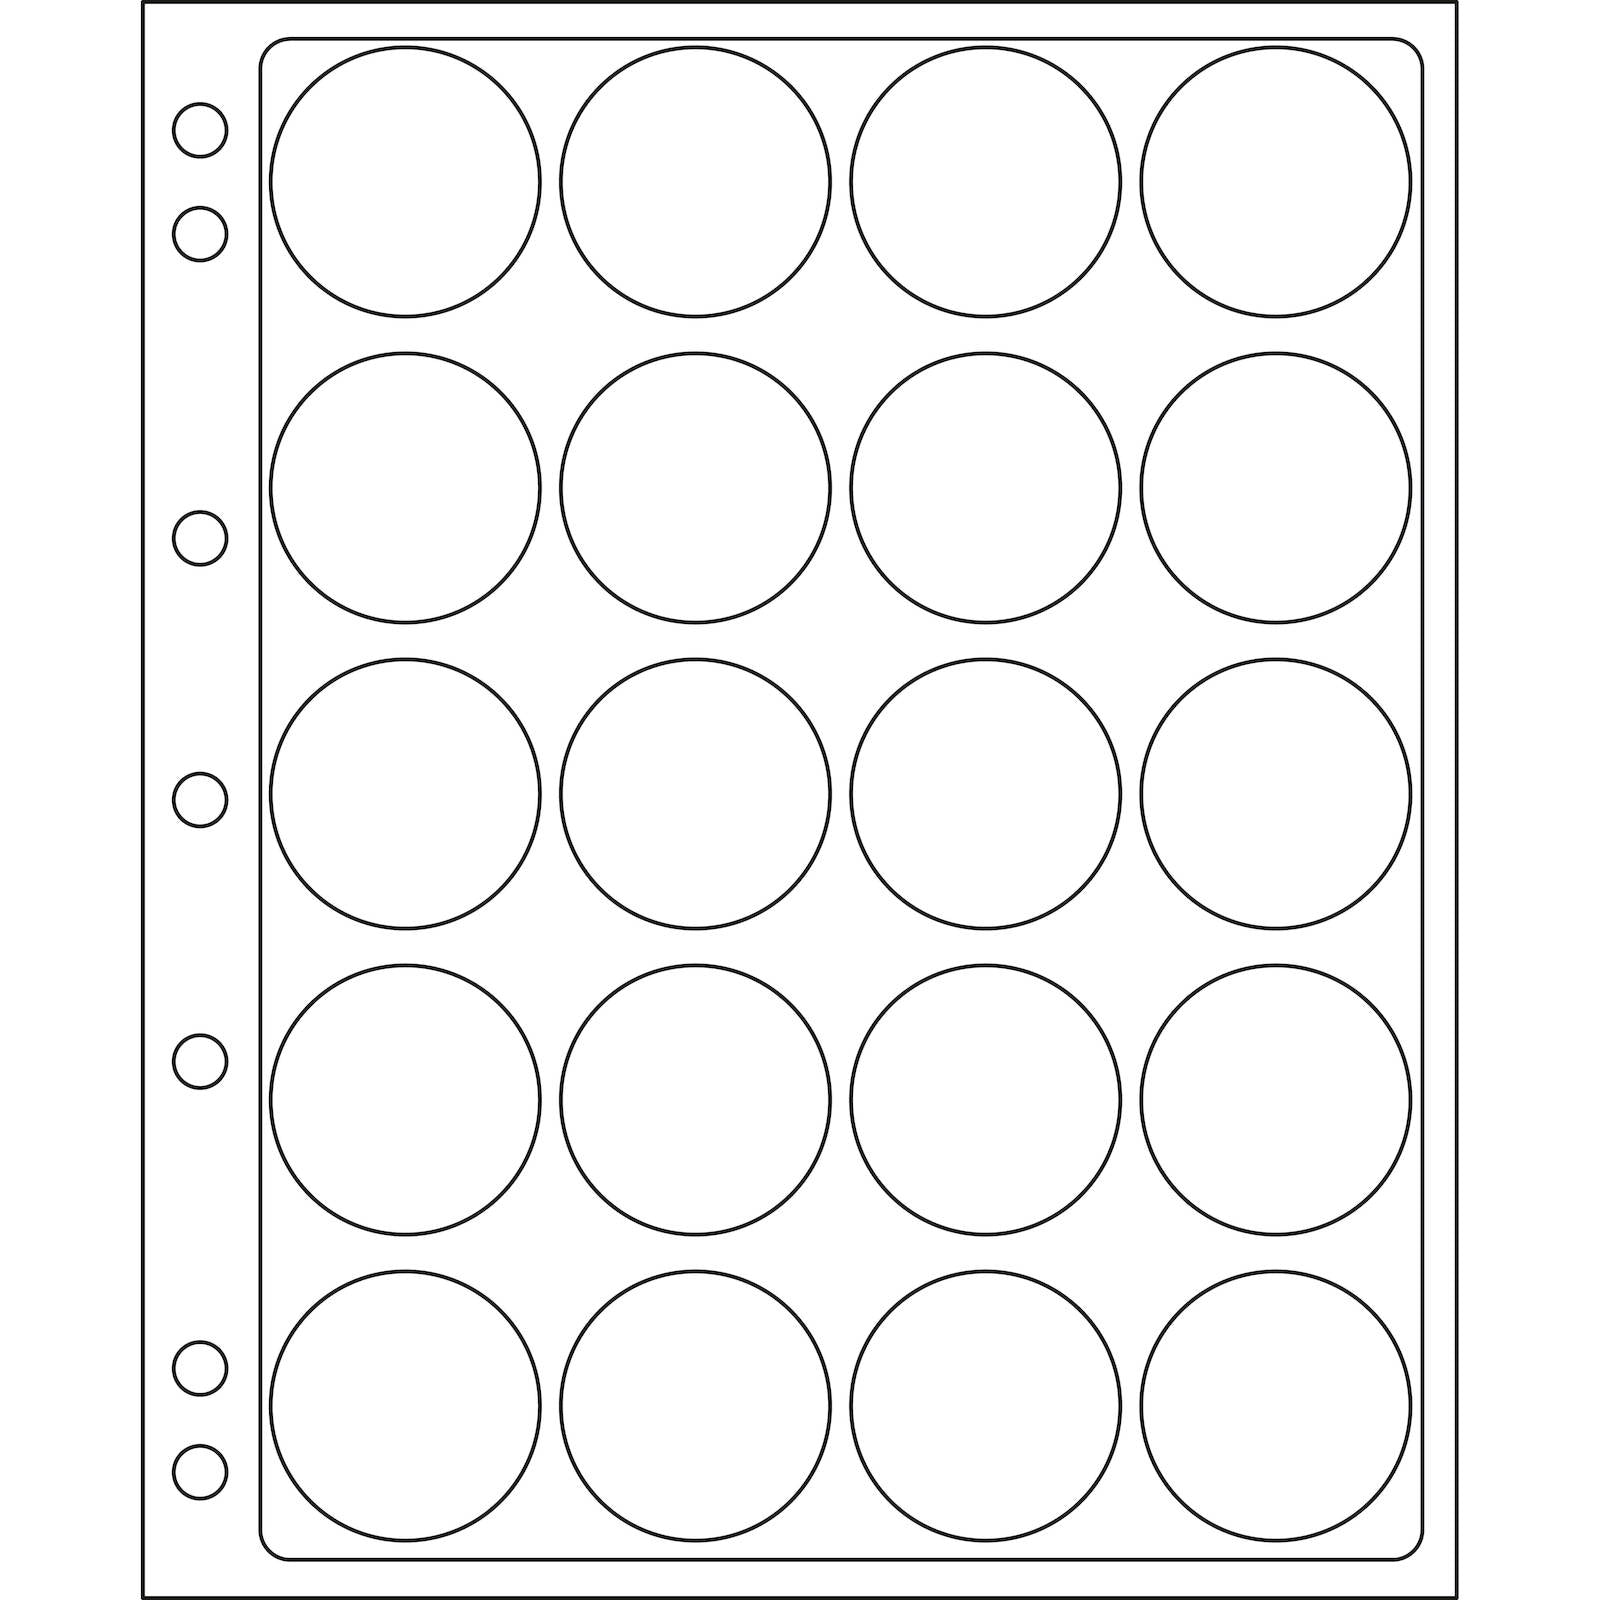 Plastic Sheets ENCAP, Clear Pockets for 20 Coins with a diameter between 39 and 41mm